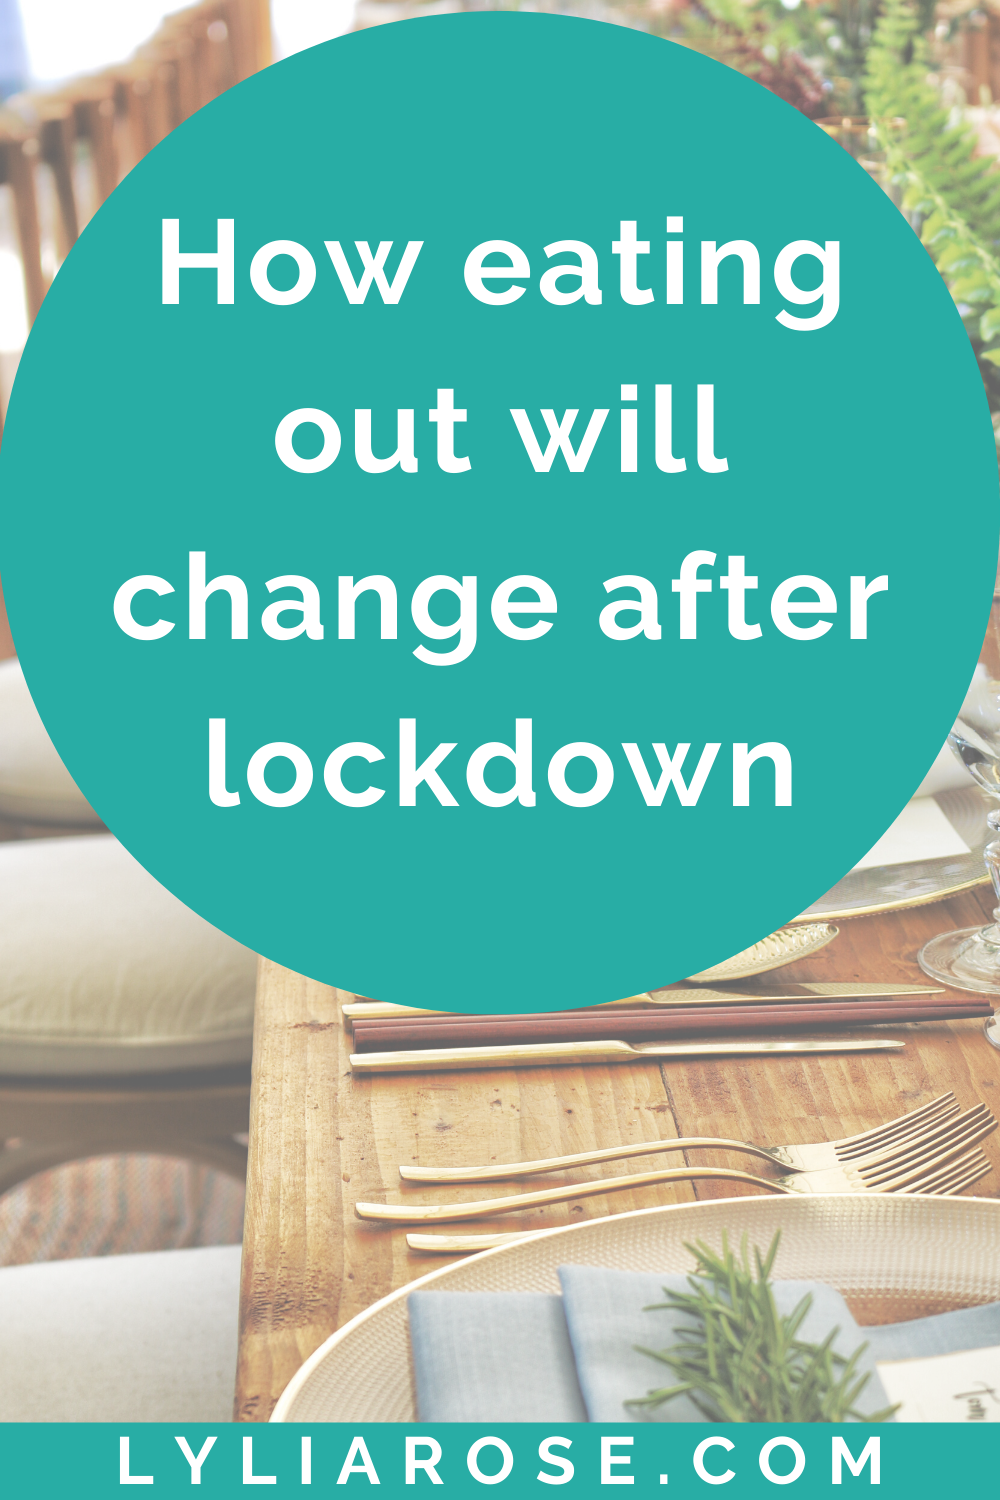 How eating out will change after lockdown